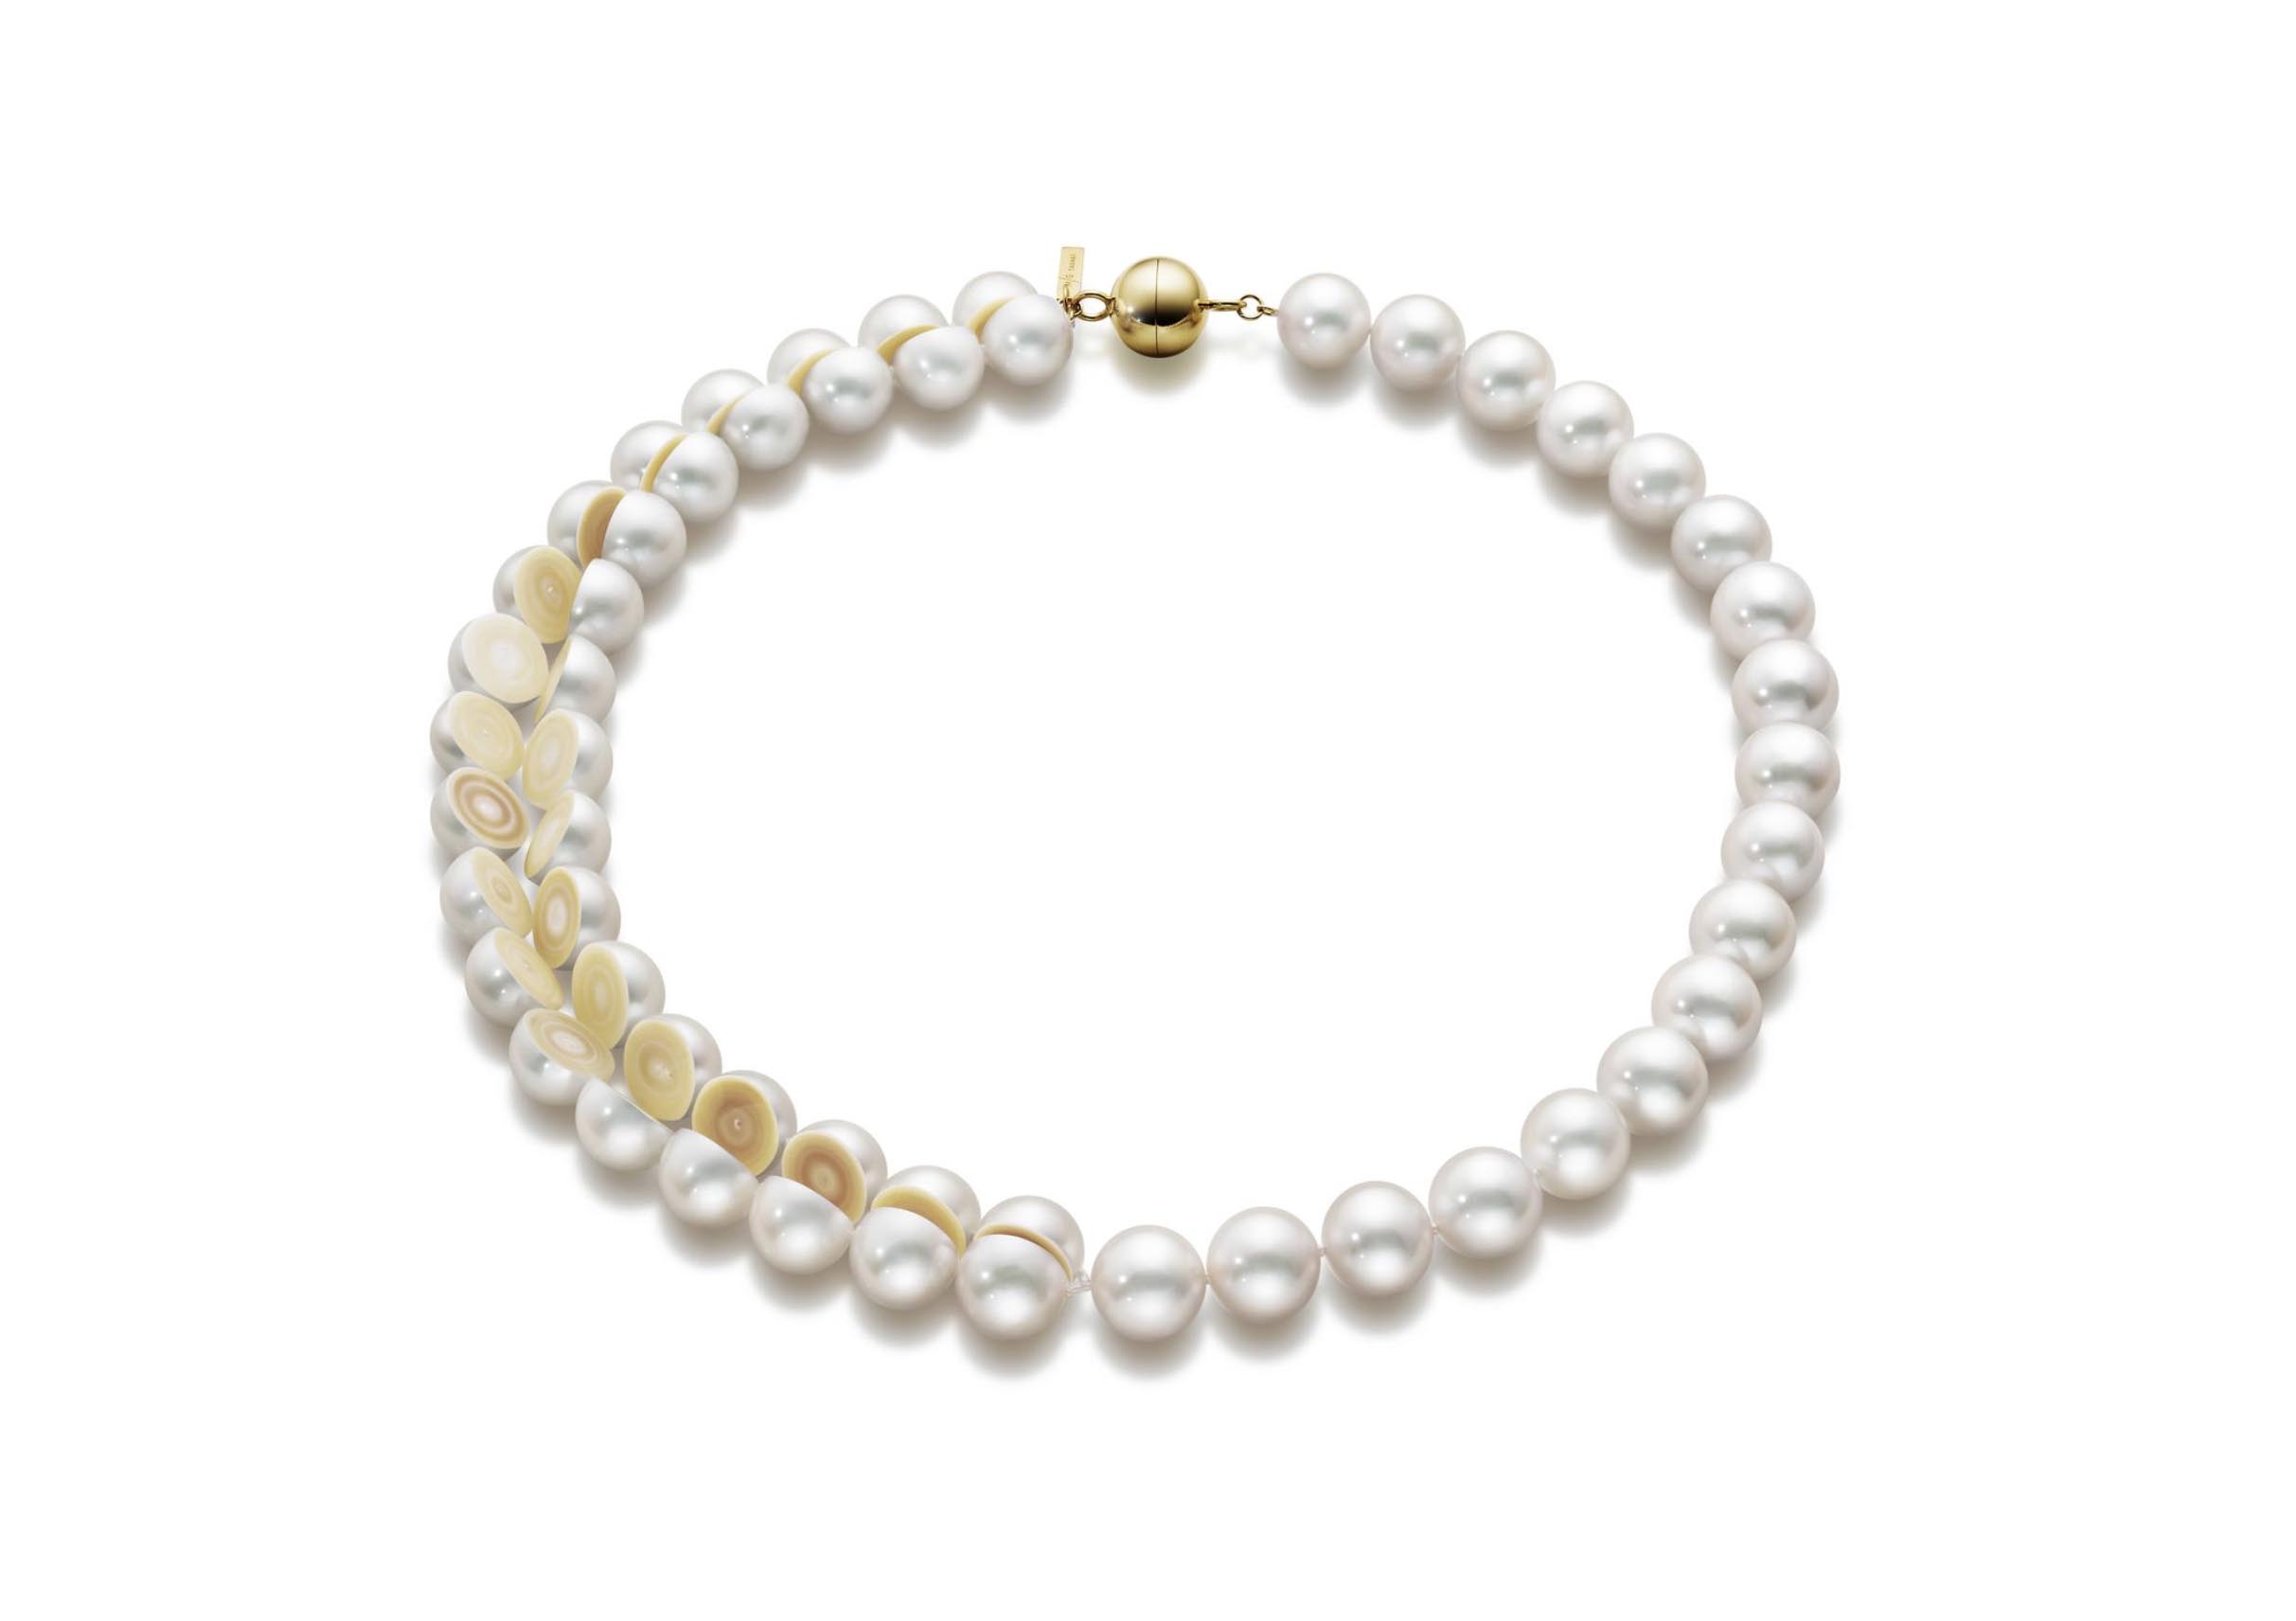 Modern pearl trends are a reflection of our perfectly imperfect selves ...